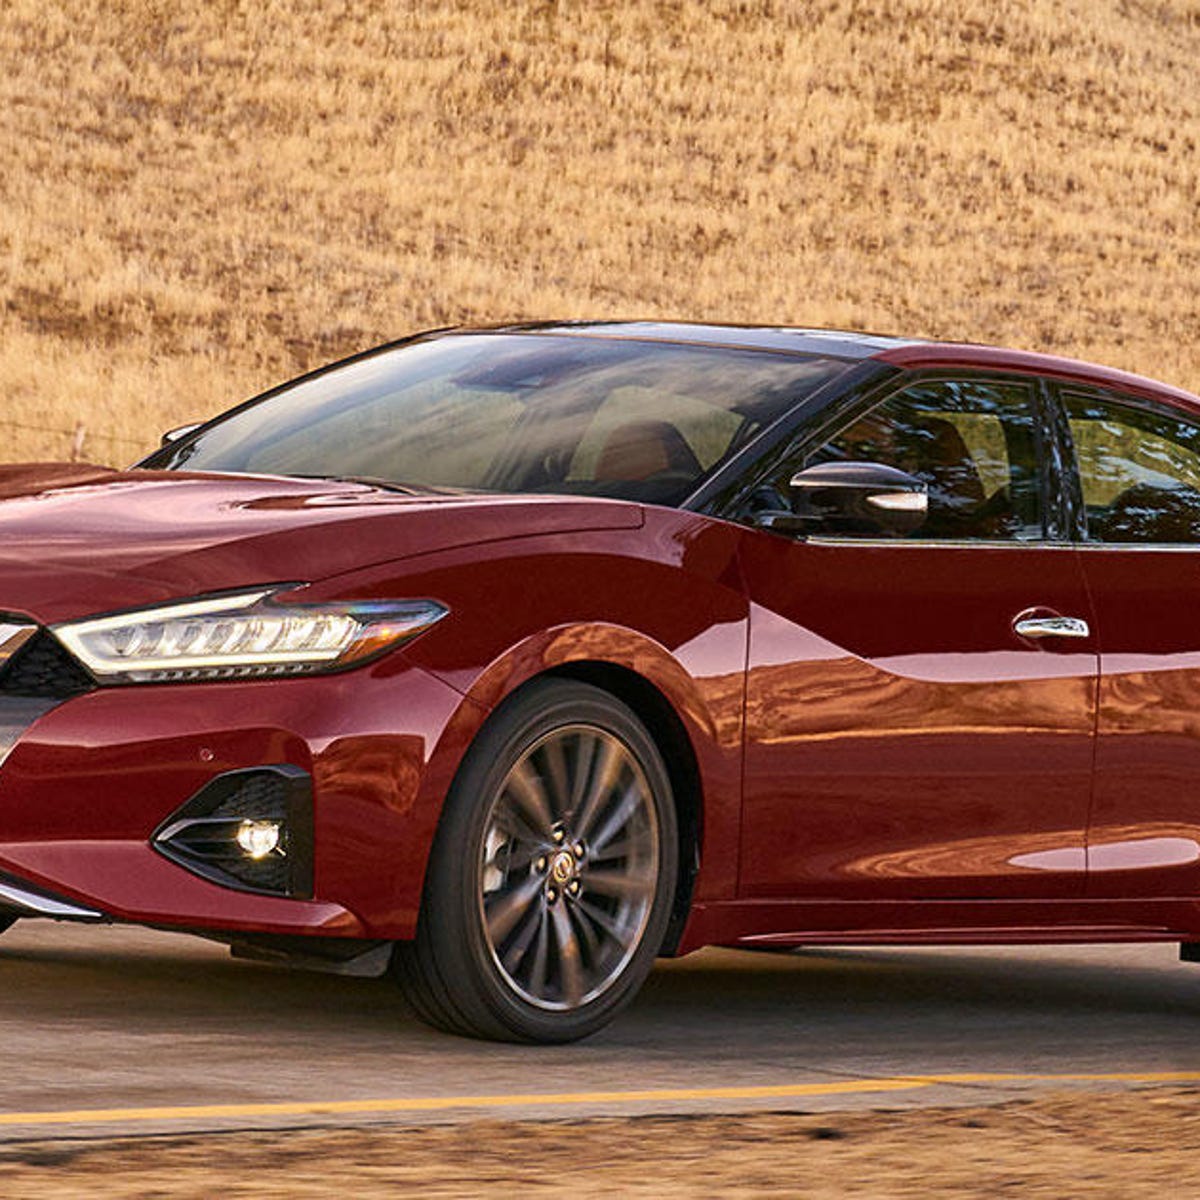 Reworked Maxima delivers a serious sports sedan